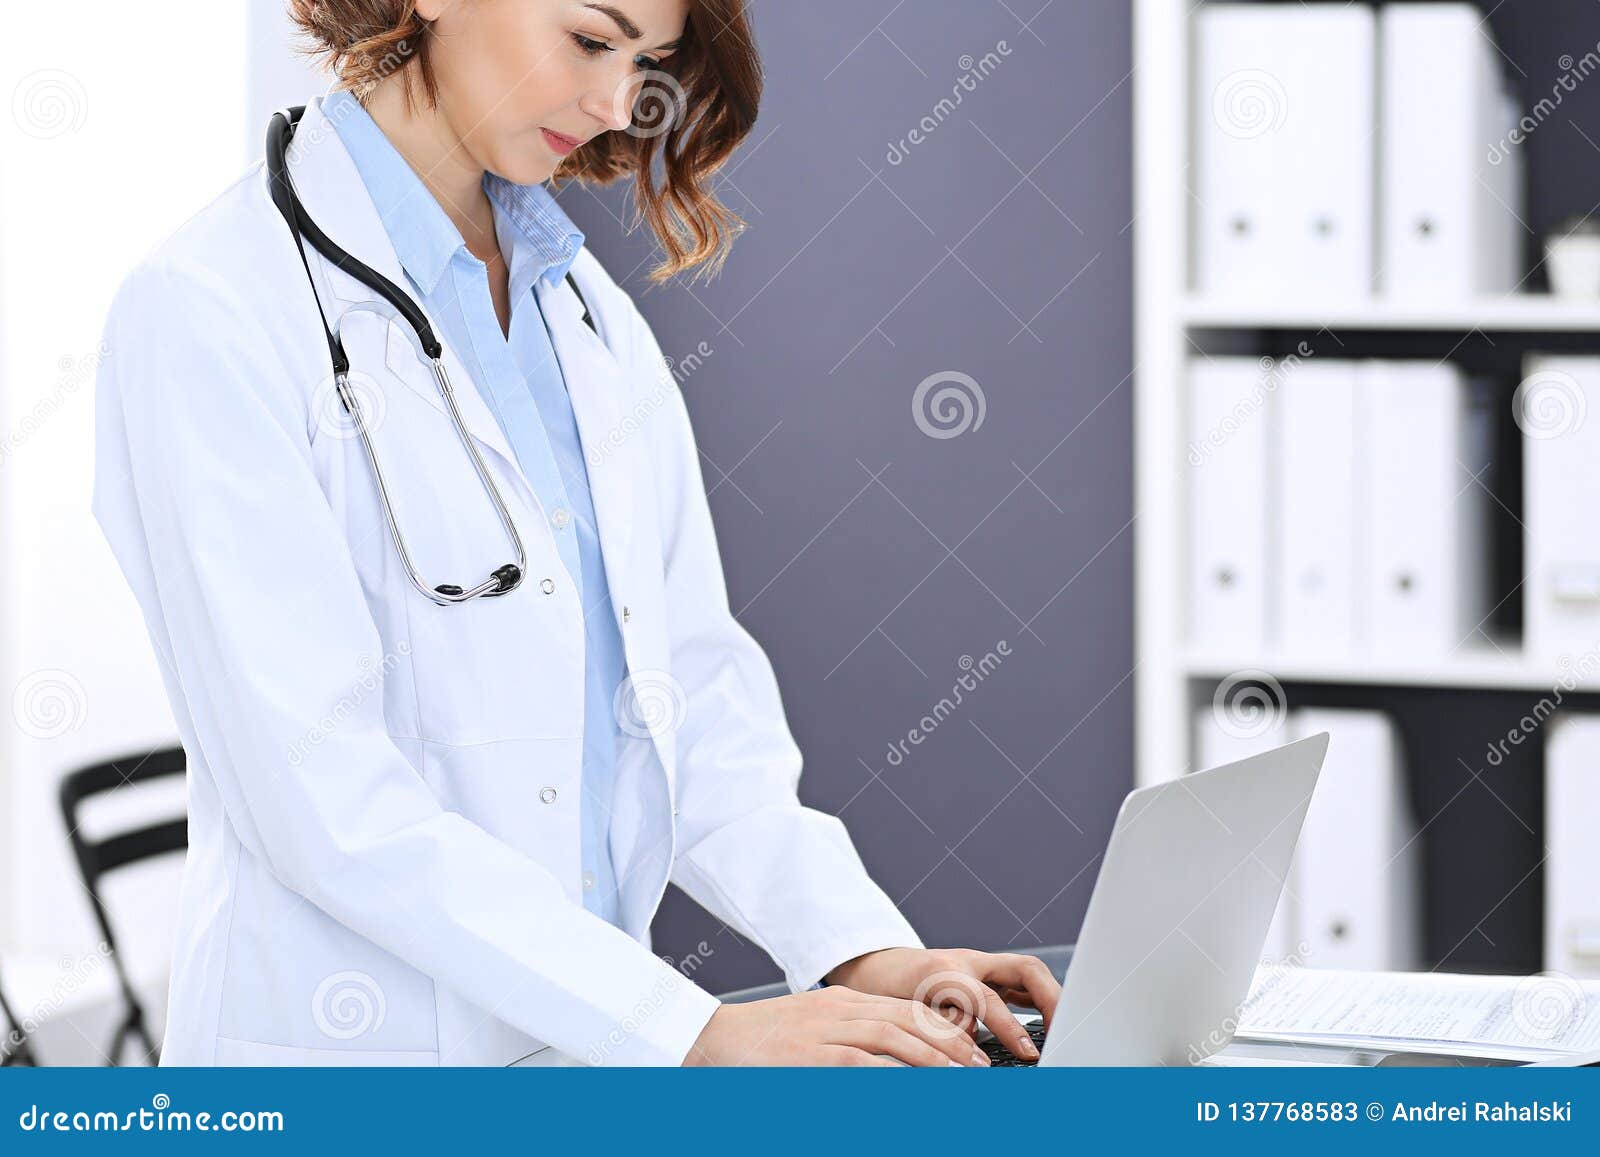 happy doctor woman at work. portrait of female physician using laptop computer while standing near reception desk at